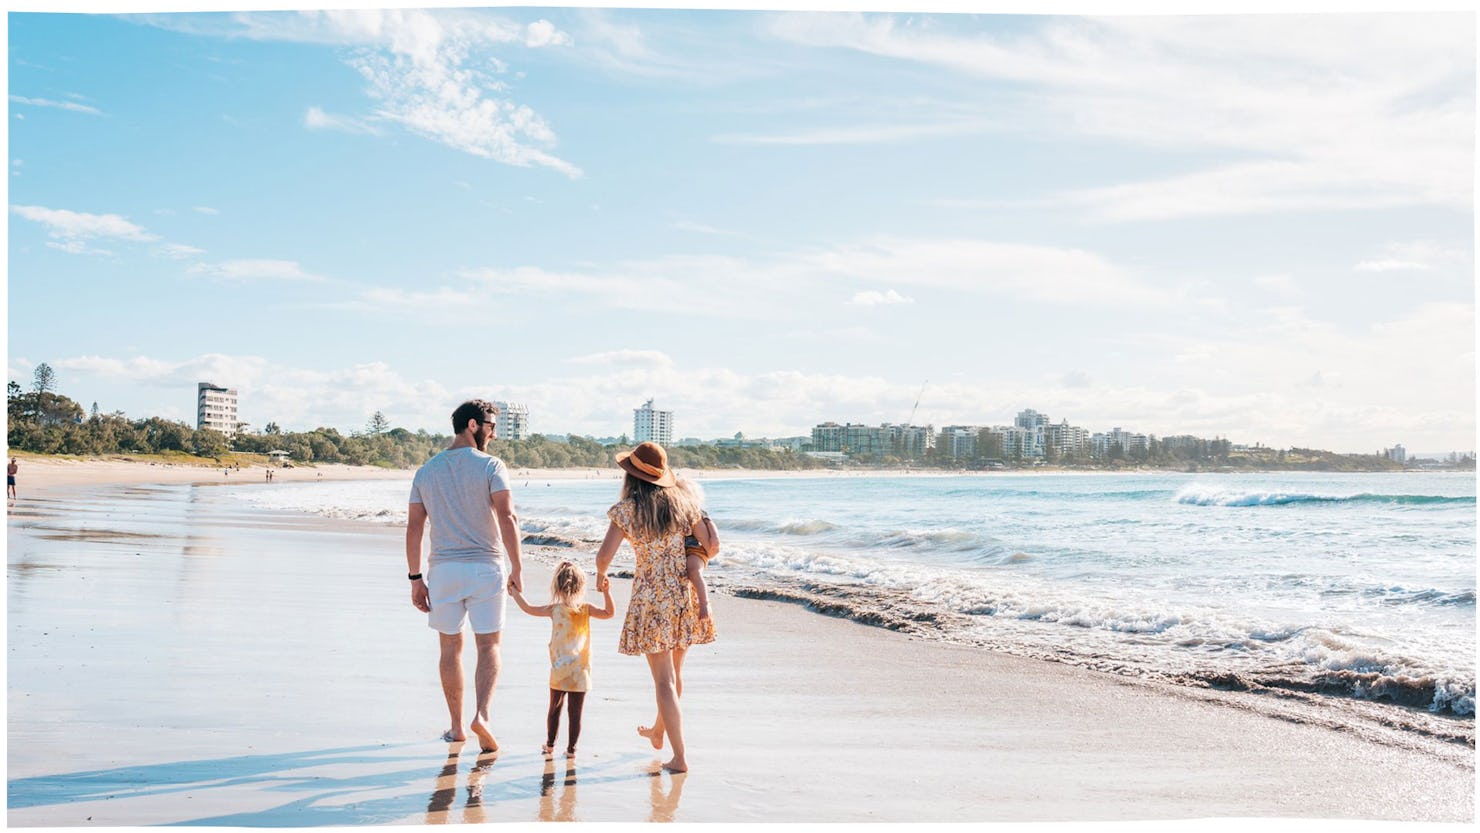 The perfect family day out in Mooloolaba